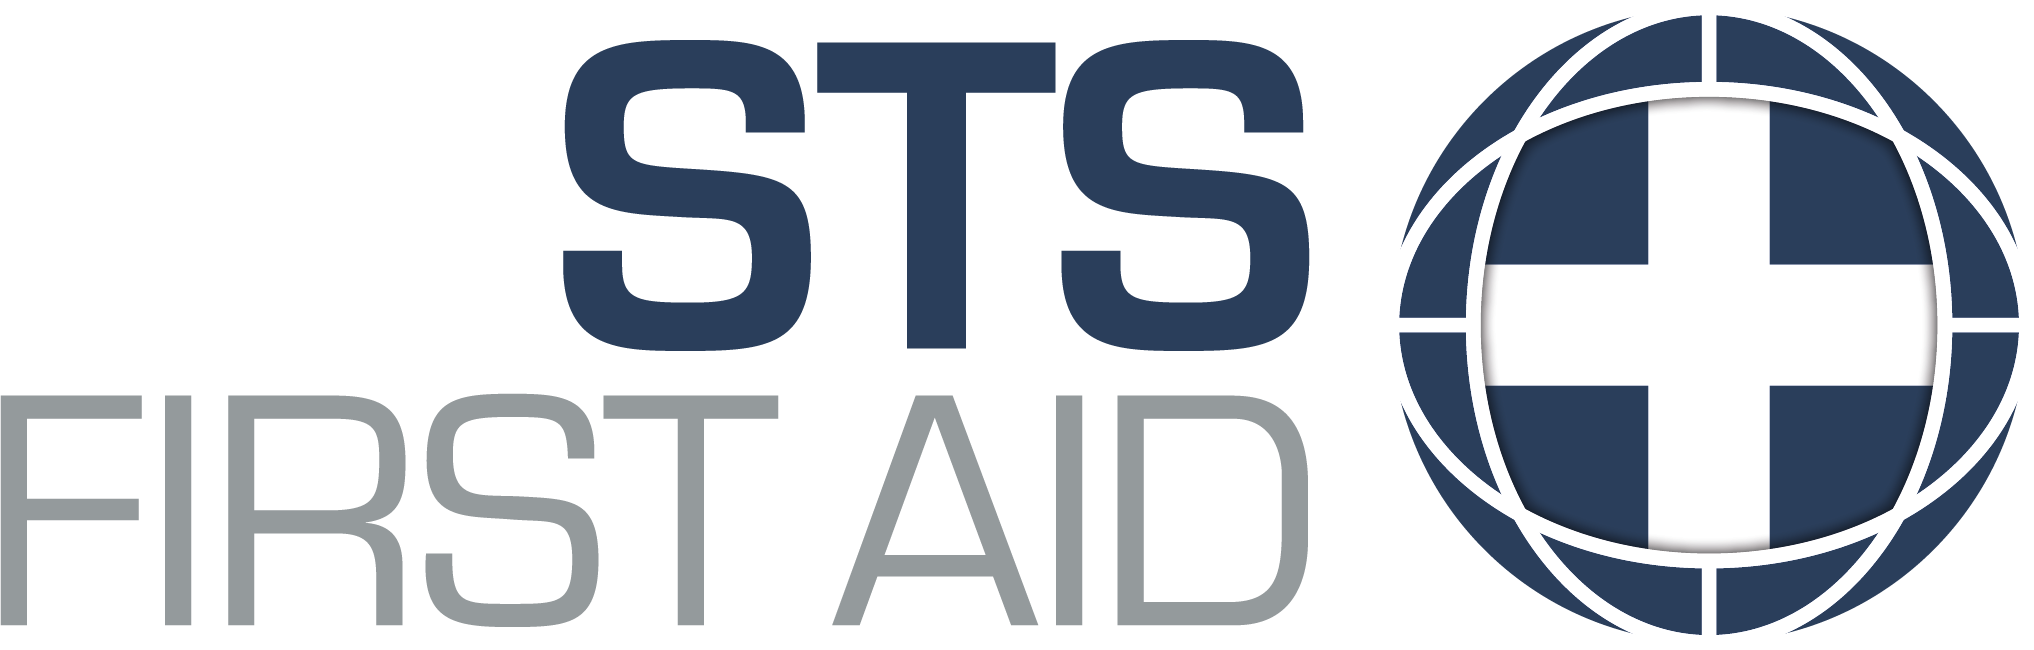 STS First Aid